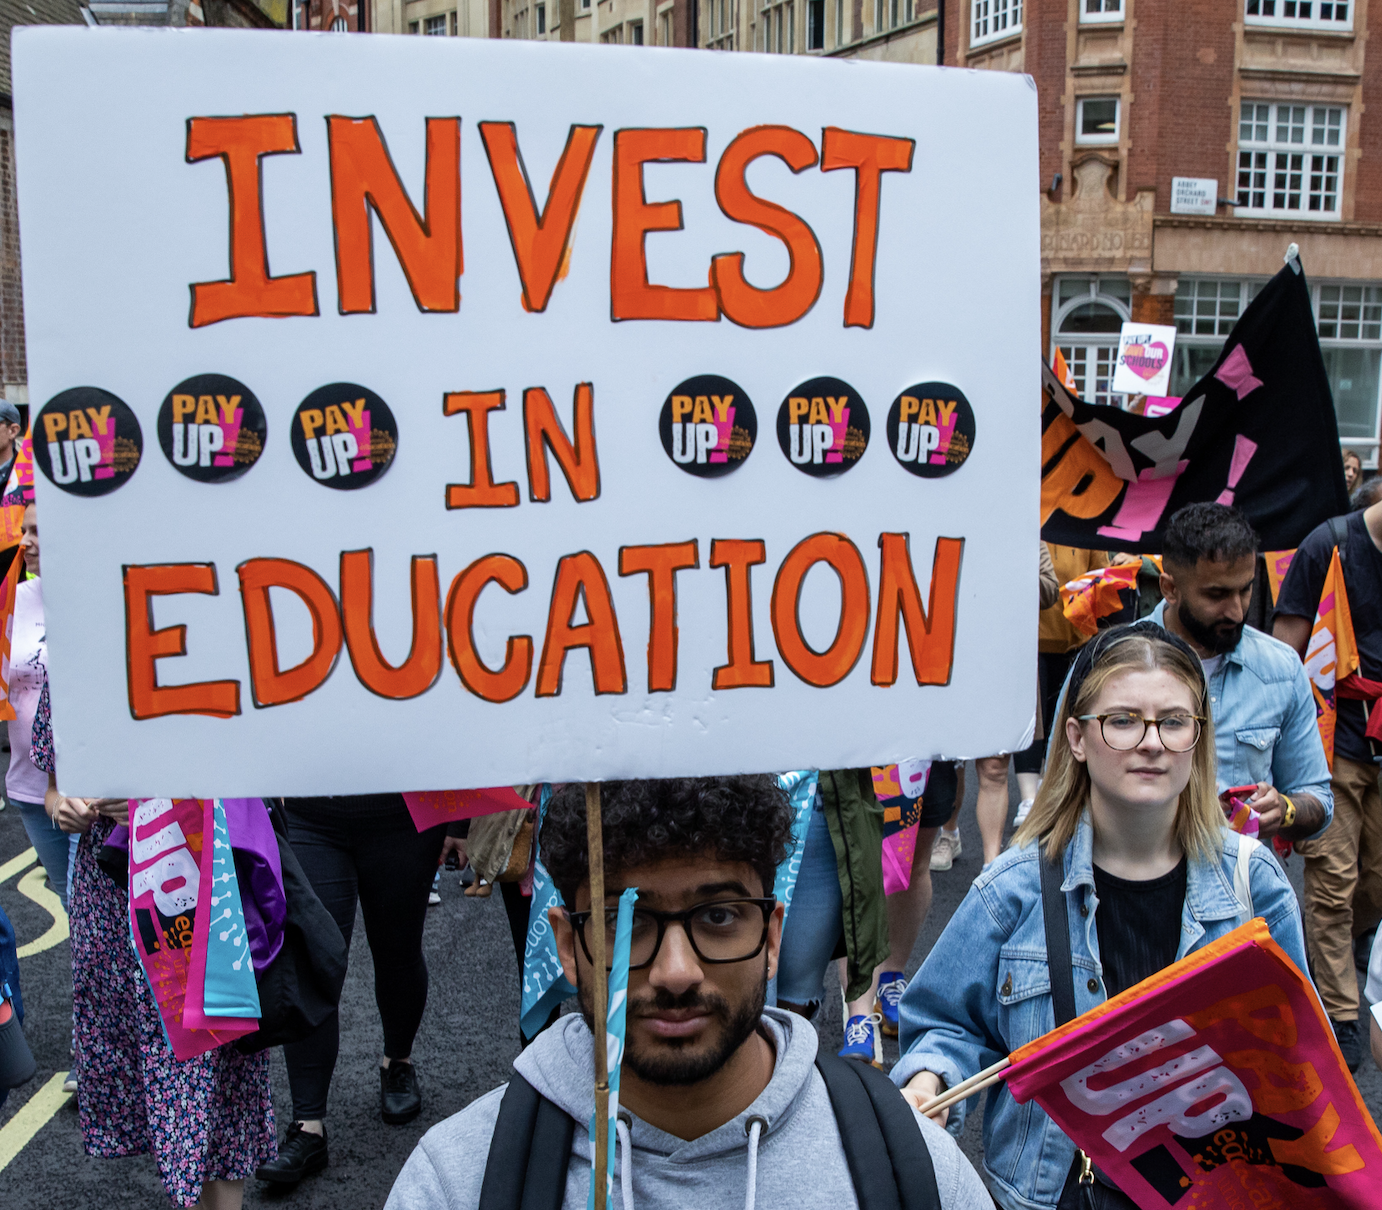 &quot;Invest in education &quot; sign held by protestor